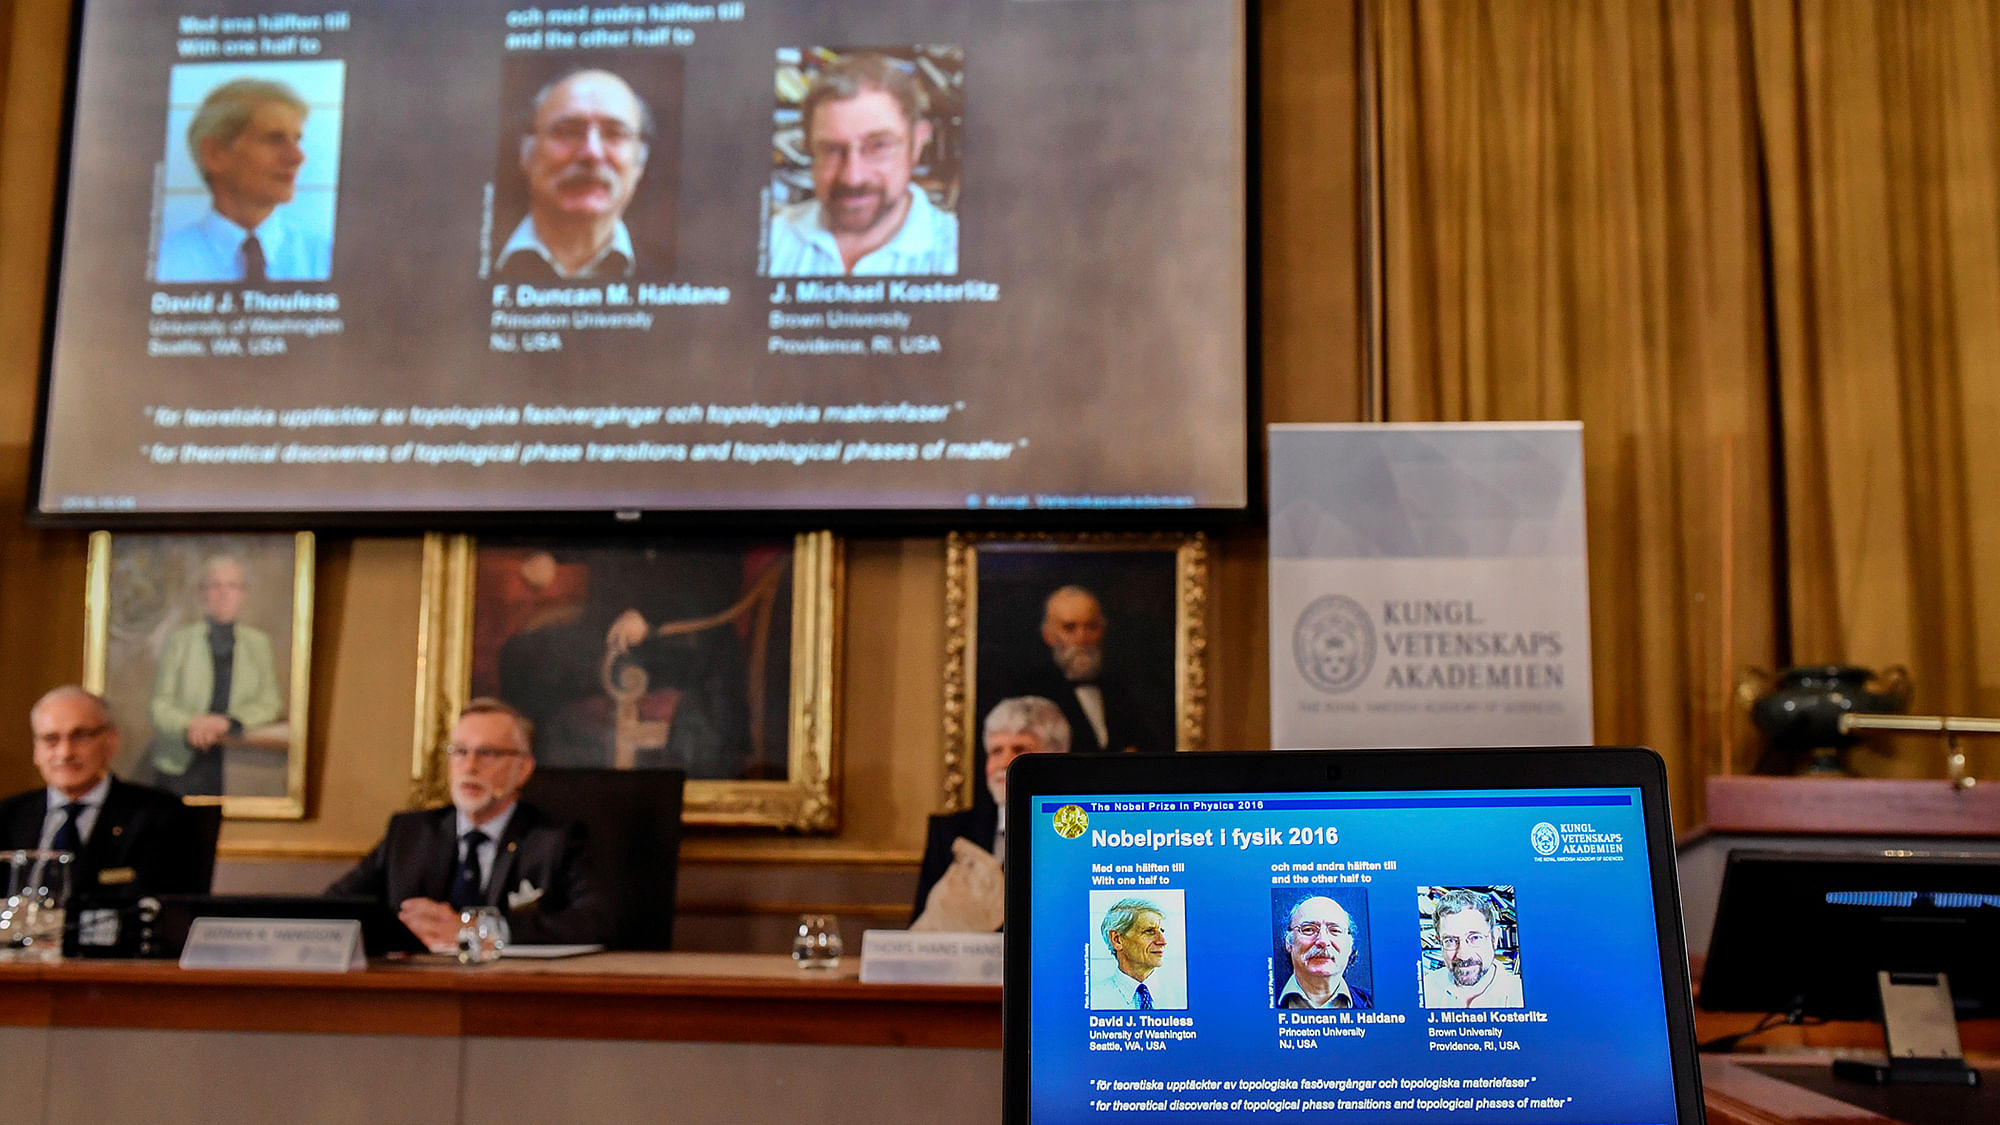 The Royal Academy of Sciences members, (from left) Professor Nils Martensson, Professor Goran K Hansson and Professor Thomas Hans Hansson reveal the winners of the Nobel Prize in Physics, at the Royal Swedish Academy of Sciences, in Stockholm, Sweden on Tuesday. (Photo: AP)